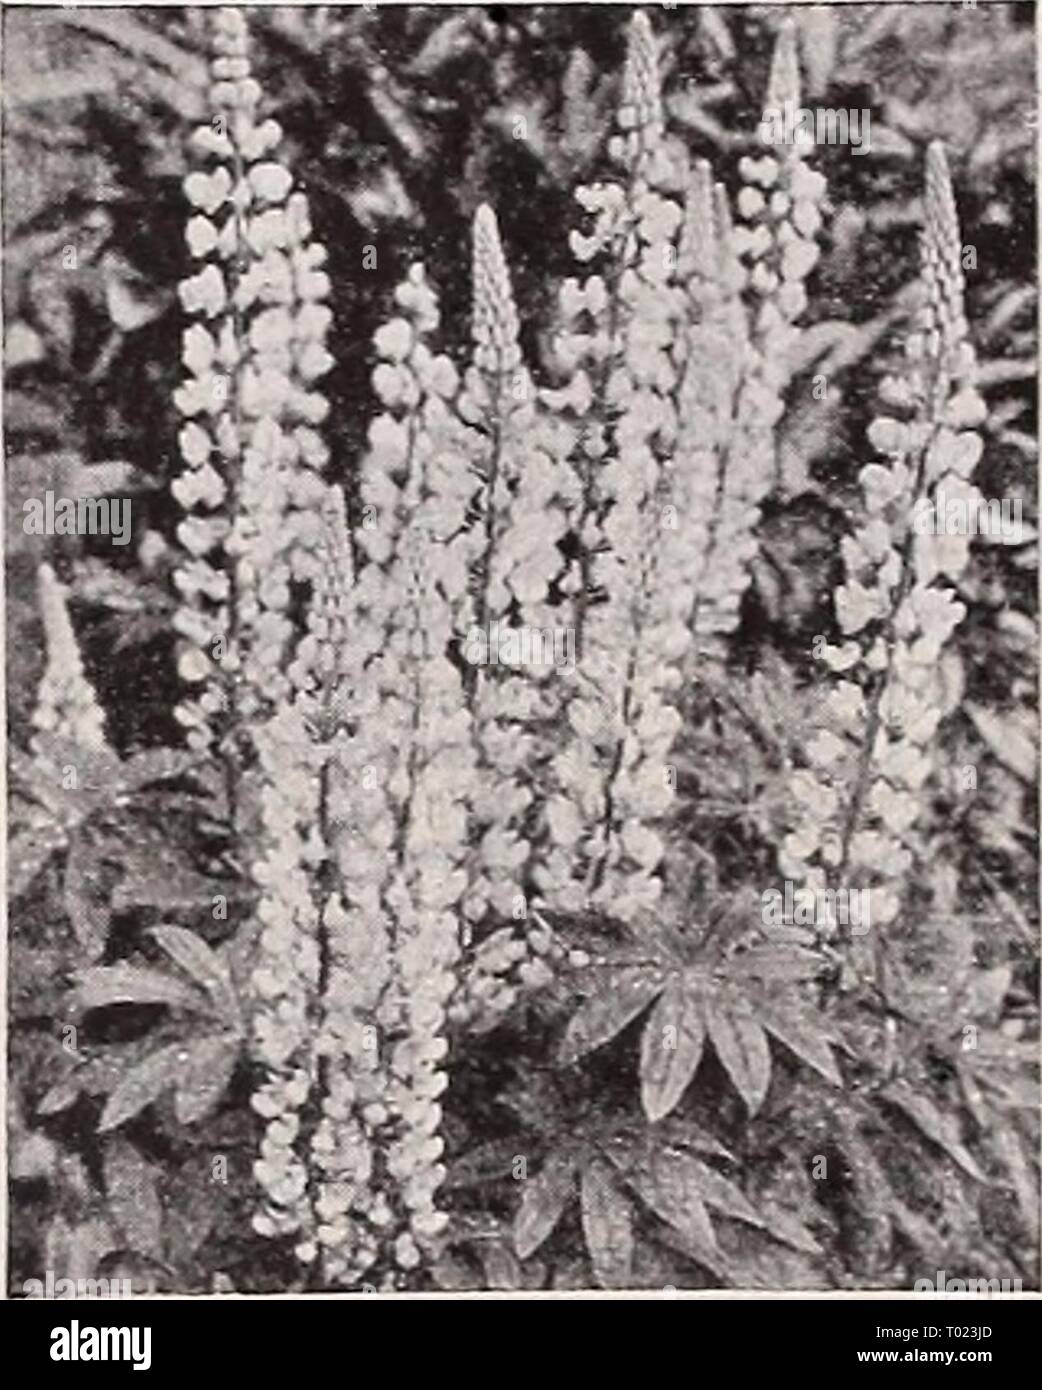 Dreer's garden book 1939 : 101 years of Dreer quality seeds plants bulbs . dreersgardenbook1939henr Year: 1939  Lobelia. Crystal Palace compacta 2811 Blue Stone (.VraO. A Dwarf plants covered with clear blue flowers. Pkt. 20c; special pkt. 75c. 2815 Crystal Palace compacta. A Rich deep blue flowers; dark foliage. i inches. Pkt. 15c; special pkt. 60c. 2820 Mixed Campacta Varieties. A Pkt. 10c; special pkt. 50c. 2825 Speciosa. A Rich ultramarine blue flowers; bronzy foliage. Trailing; 9 inches tall. Pkt. 10c; special pkt. 40c. 2827 Tenuior. Of upright habit grow- ing 15 inches tall. Bears a prof Stock Photo